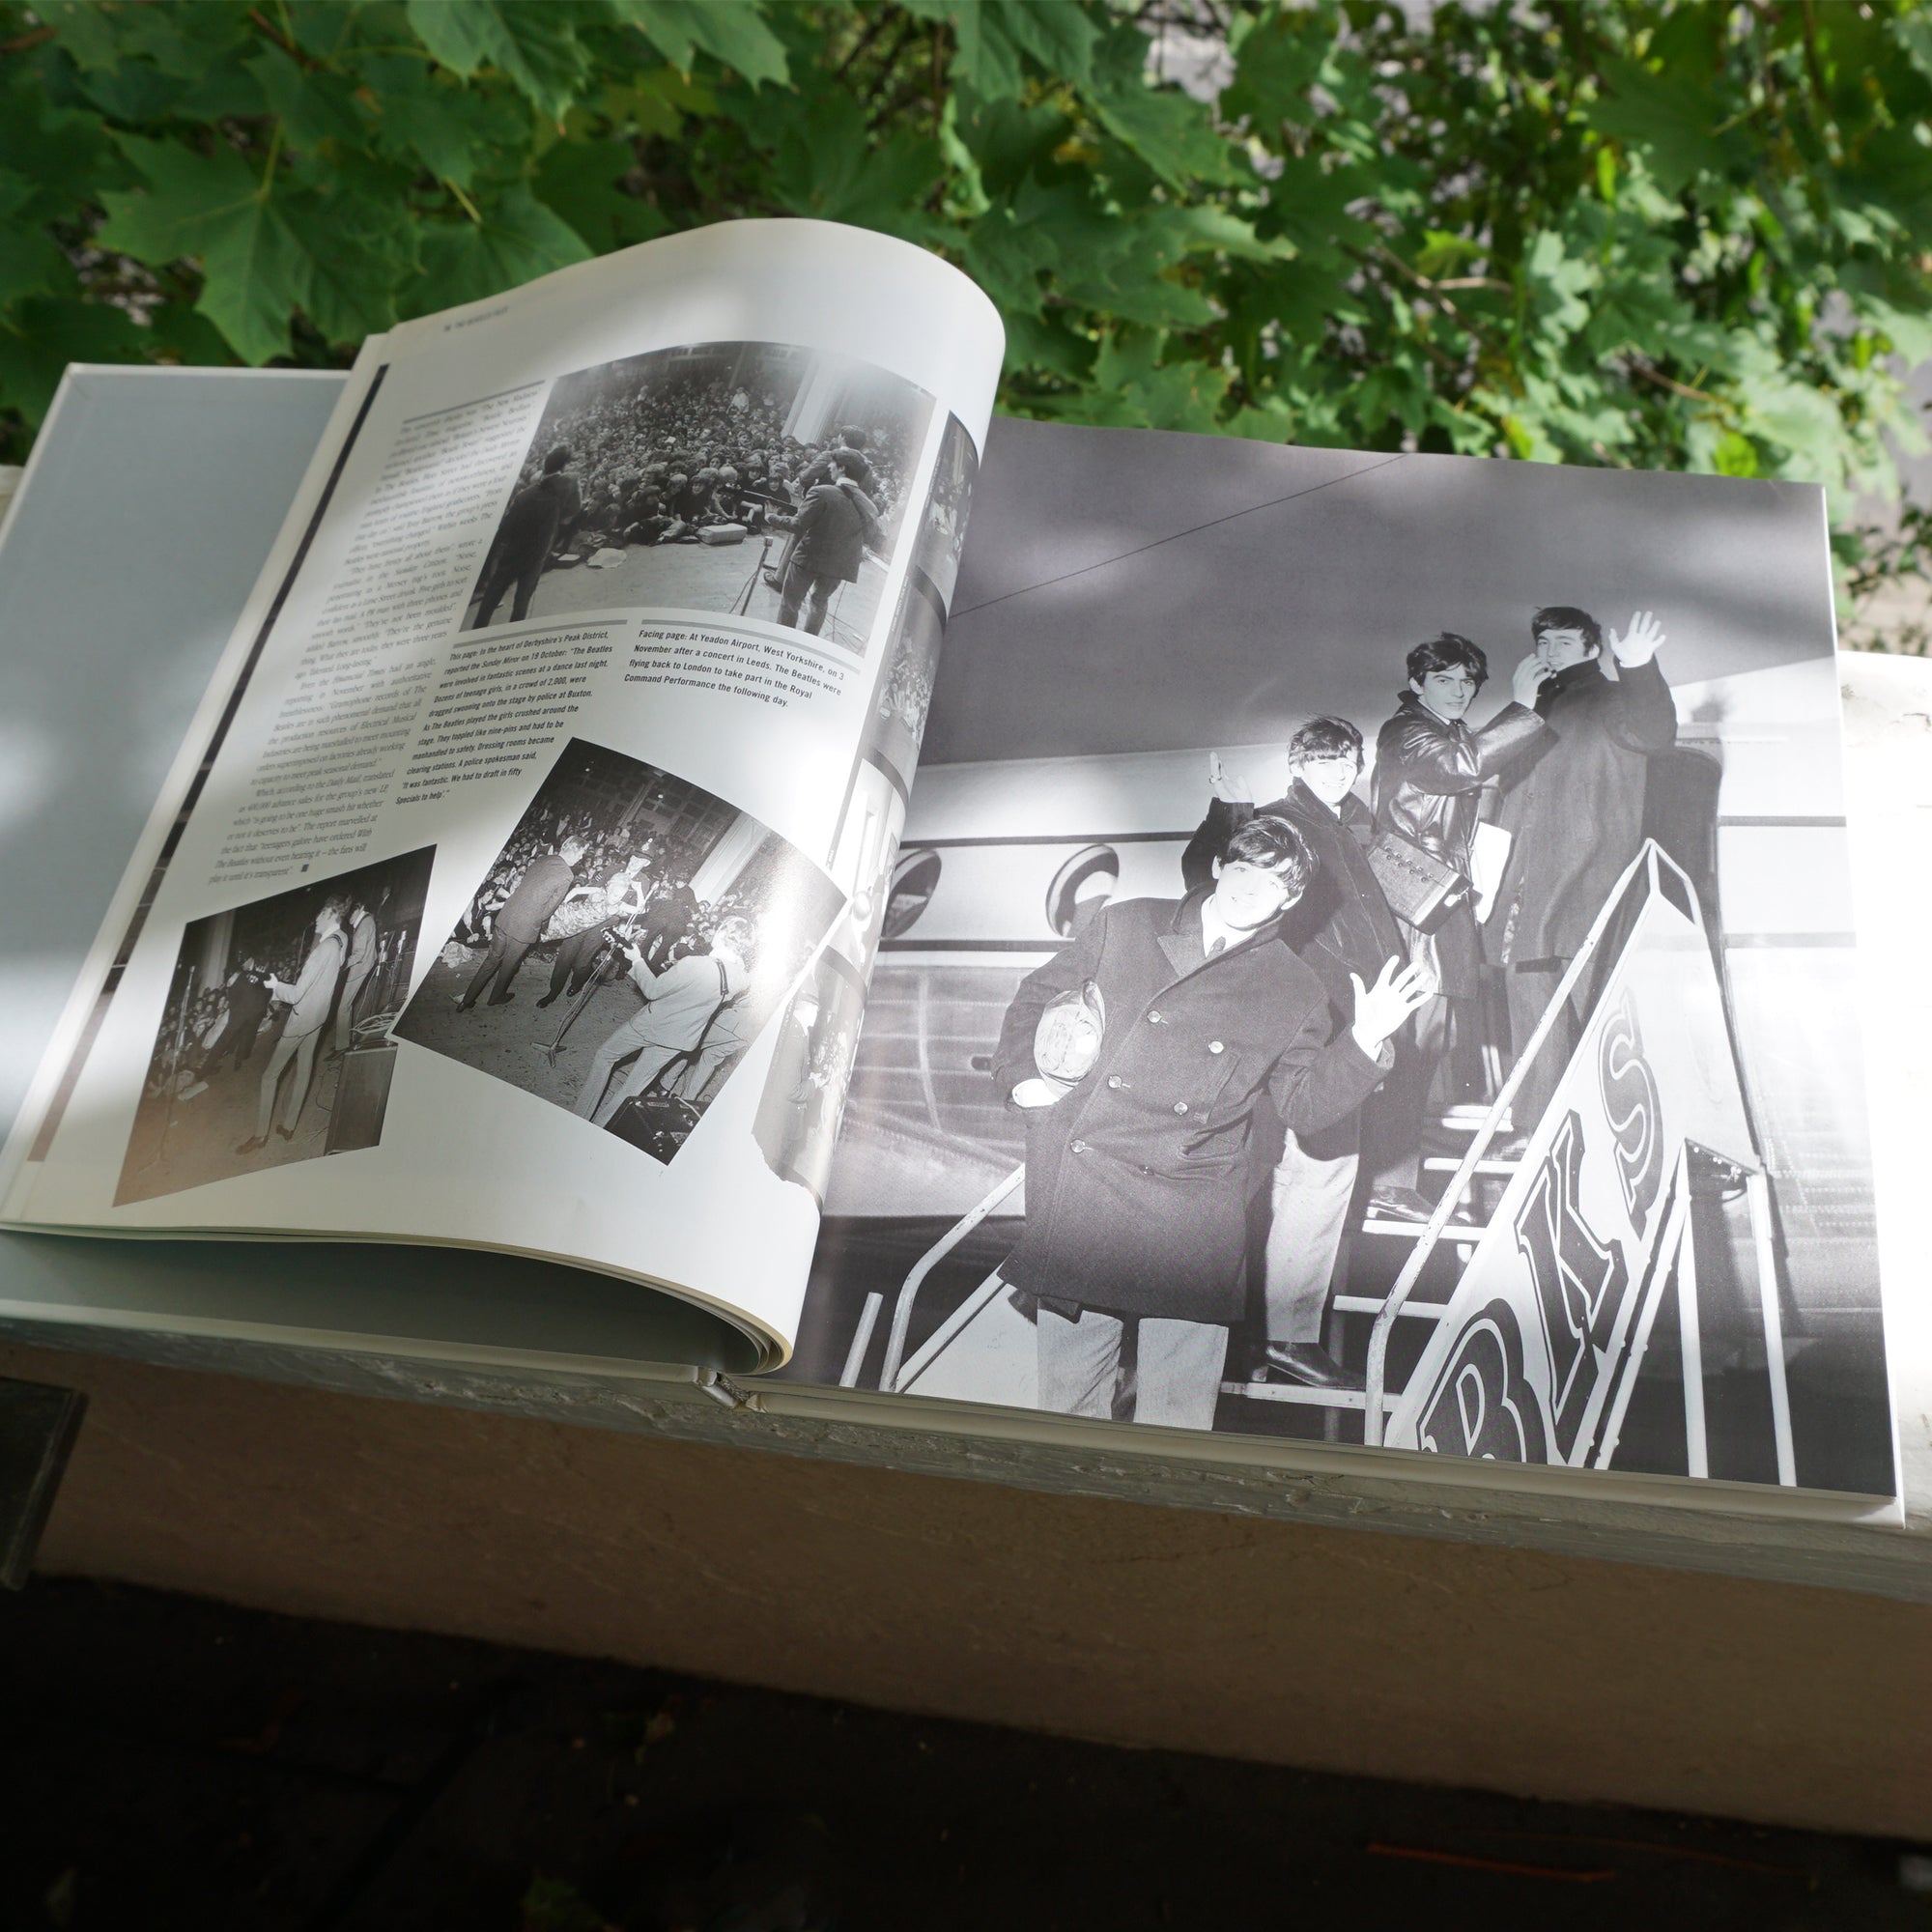 1998 Vintage BRAMLEY PUBLISHER The Beatles Files Book by Andy Davis. Printed in Italy.